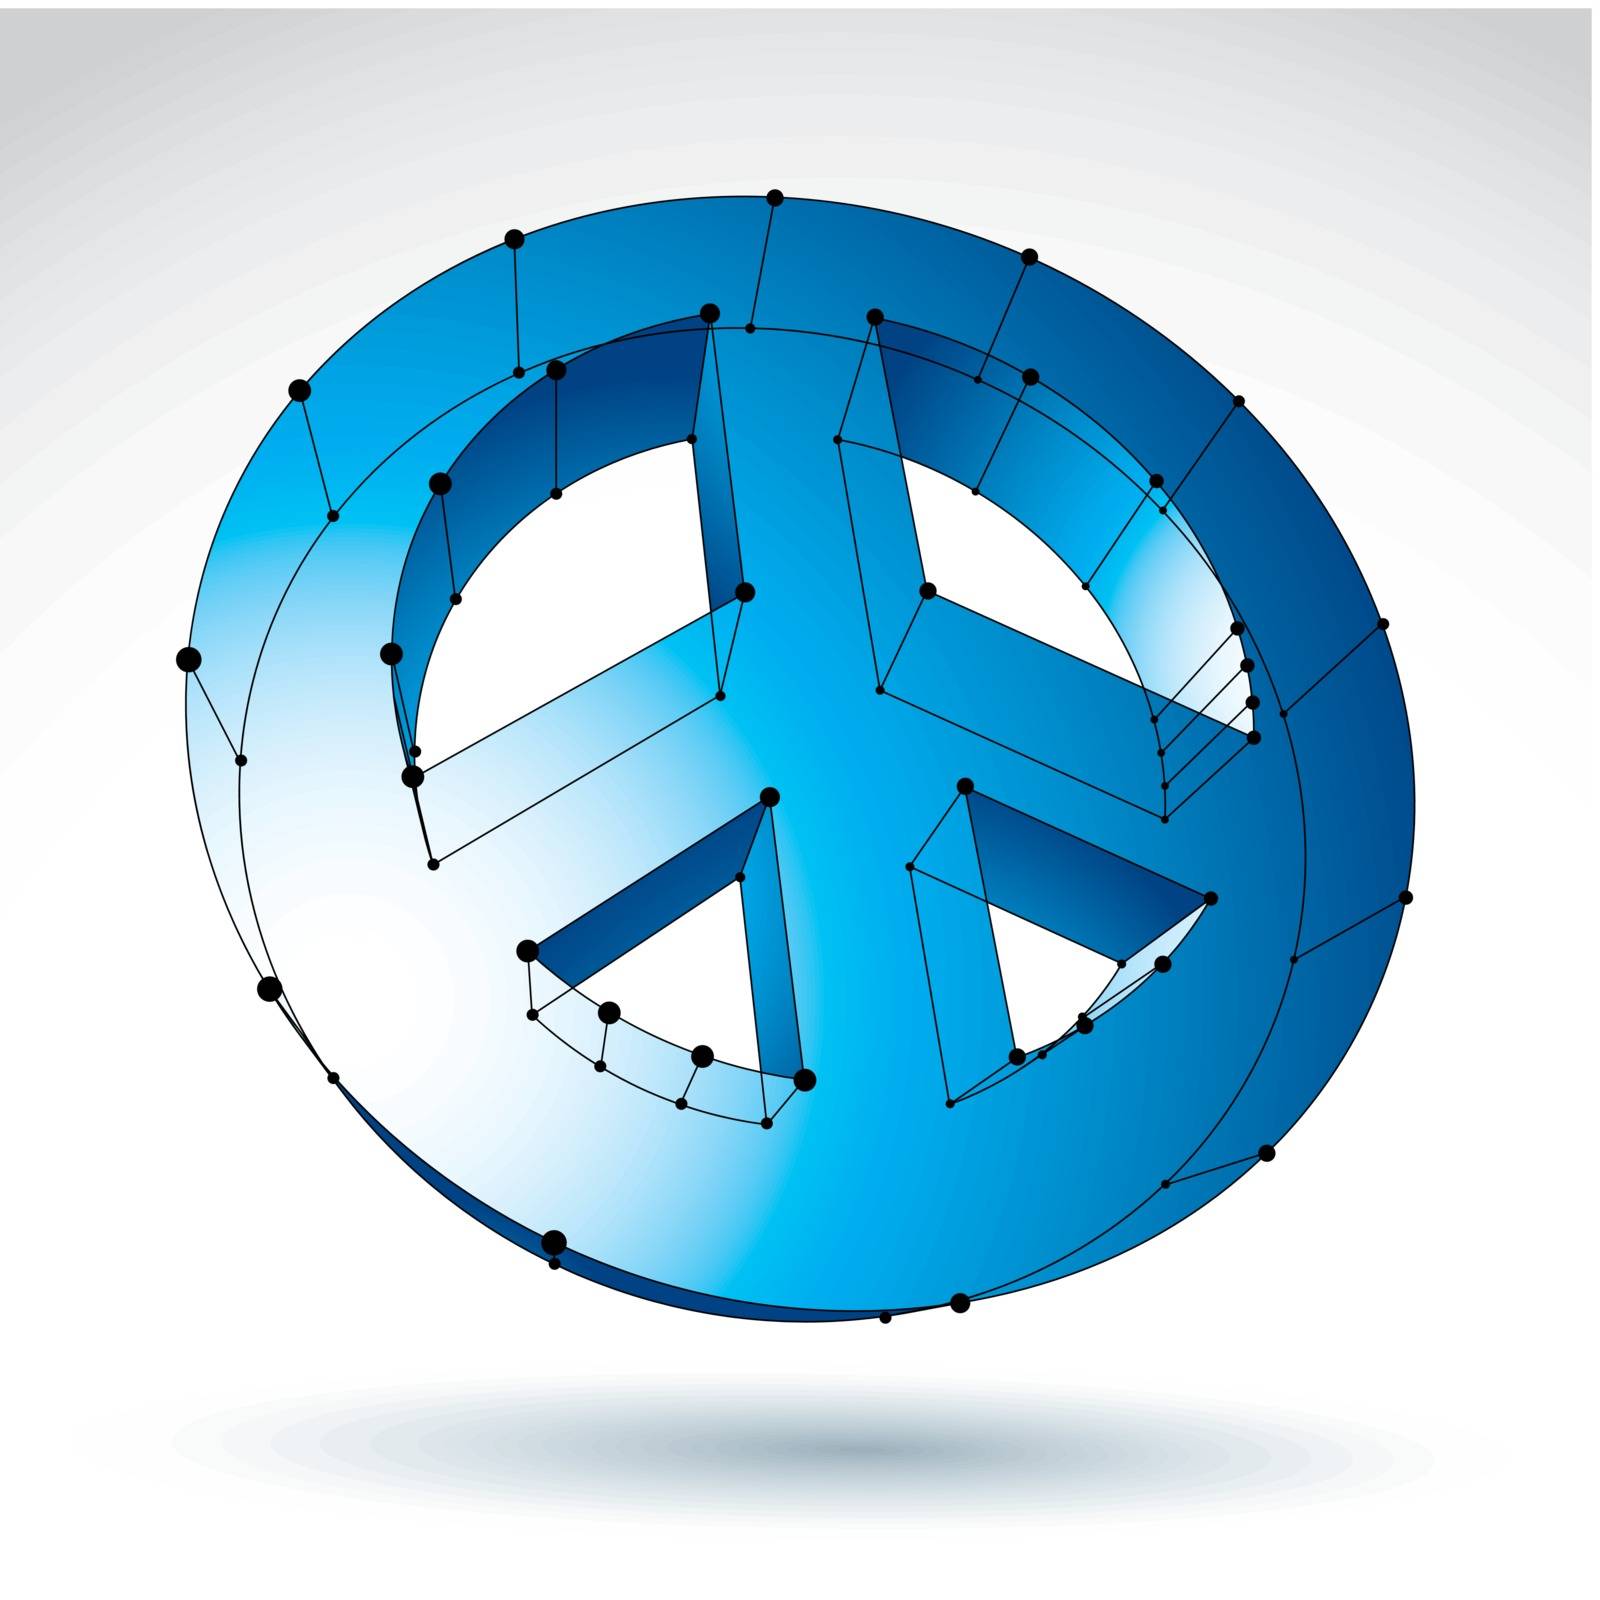 3d mesh blue peace icon isolated on white background, colorful lattice peace symbol from 60s, dimensional tech circle hippy object with black connected lines, bright clear eps 8 vector illustration.